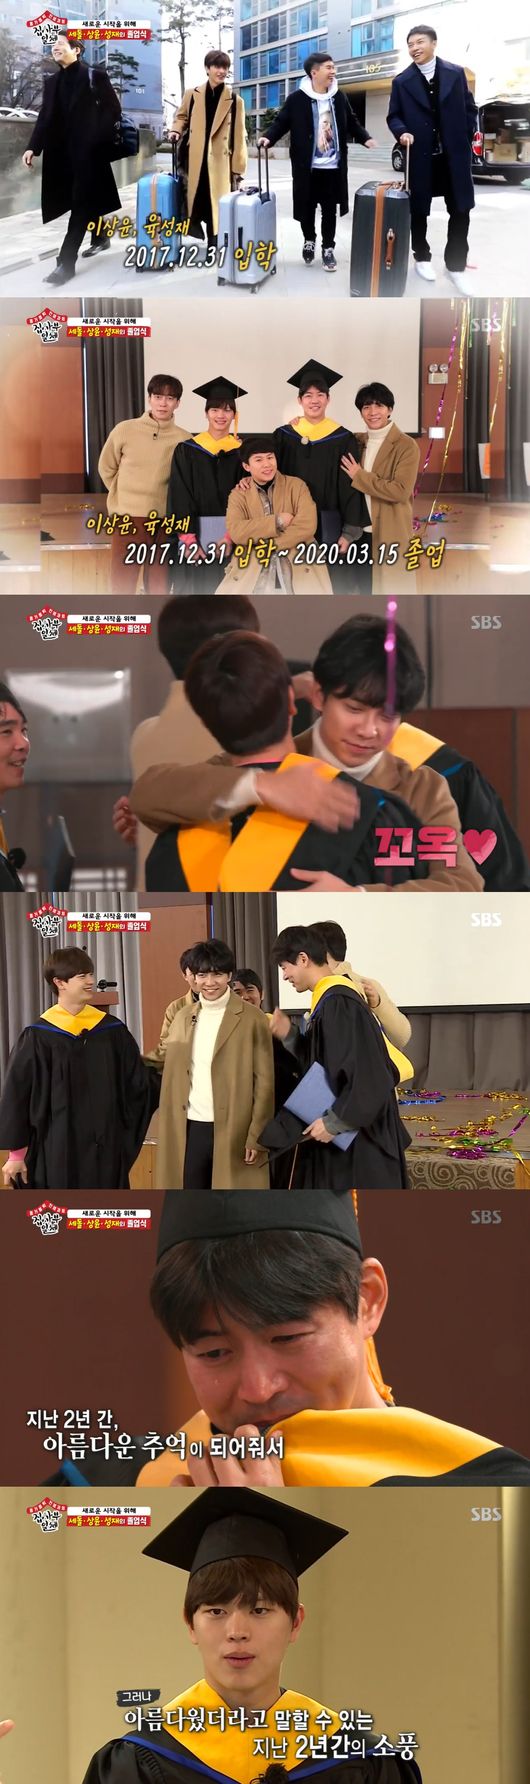 Lee Sang-yoon and Yook Sungjae, the first members of All The Butlers, performed the tearful The Graduate ceremony.In SBS All The Butlers broadcasted on the afternoon of the 15th, Lee Sang-yoon and Yook Sungjae were drawn to leave the program for their own reasons such as acting, army, and time alone.Lee Sang-yoon and Yook Sungjae chose The Graduate rather than getting off All The Butlers.The crew also gave tears and impressions to viewers by replacing their last with the heartwarming The Graduate style rather than concluding it as get off.Lee Sang-yoon, Yook Sungjae leave All The Butlers after Lee Sedol as previously announced.As the fixed member and daily student lineup have already come to the fore, interest in the new family is also hot.First of all, Yook Sungjae said, It seems hard to put together arrogant thoughts and say it. I will miss the shooting day that I went on every other week.This is the only idea, he said, breaking up with All The Butlers.Lee Sang-yoon also blushed and said, The first day of recording may be strange, and the second is what?I want to go, and the third time, Why do not you go? I think it will take time to do The Graduate with my heart.The Graduate is not an eternal parting, he confessed.Shin Sung-rok, who recently joined Lee Seung-gi, Yang Se-hyeong, Lee Sang-yoon and Yook Sungjae, who had been together since the first broadcast of All The Butlers in December 2017,Lee Seung-gi, the leader of All The Butlers and the center of the program, expressed regret, saying, Is this the last time we eat together?In addition, Lee Sang-yoon said, Feelings who will support All The Butlers more in the future. Our empty seats are Feelings, who will fill, how the program will proceed, and more affection than I will.Even if I leave, I will support All The Butlers to the end.All The Butlers Youngjae, who had dominated the cuteness of his brothers as the youngest, said, I am jealous.Im (quite sure) who will be next to me, which surprised Lee Seung-gi, as she had never been so honest with her feelings.Lee Seung-gi said, I have come out of my heart since I met you.Yook Sungjaes affection for the members of All The Butlers continued; he even mentioned the boy group BtoB (BTOB), which he now belongs to.Yook Sungjae said to Lee Seung-gi, Yang Se-hyeong, Lee Sang-yoon, Shin Sung-rok, The brothers who are proud of BtoB next, and I thought that there would be no more family like BtoB. From one point on, I felt myself laughing outside talking about All The Butlers brothers.I appreciate it and I appreciate it.Also, Yook Sungjae said: Its like a nest that you might be able to come back rather than leave, I dont want to make a great last-minute call, because I want to keep seeing it.I think my memories with my brothers are the biggest.There are many precious memories with the masters, but the most memories and gratitude remain, All The Butlers brothers seem to be tearful.Finally, Lee Sang-yoon said, I thought it was like a beautiful trip. It was so good. I want to say thank you.Thank you, he said, creating a warm atmosphere with the members of All The Butlers.Meanwhile, Lee Sang-yoon and Yook Sungjaes The Graduate SBS All The Butlers will be with new guests every week for the time being as a daily student system.SBS All The Butlers captures broadcast screen